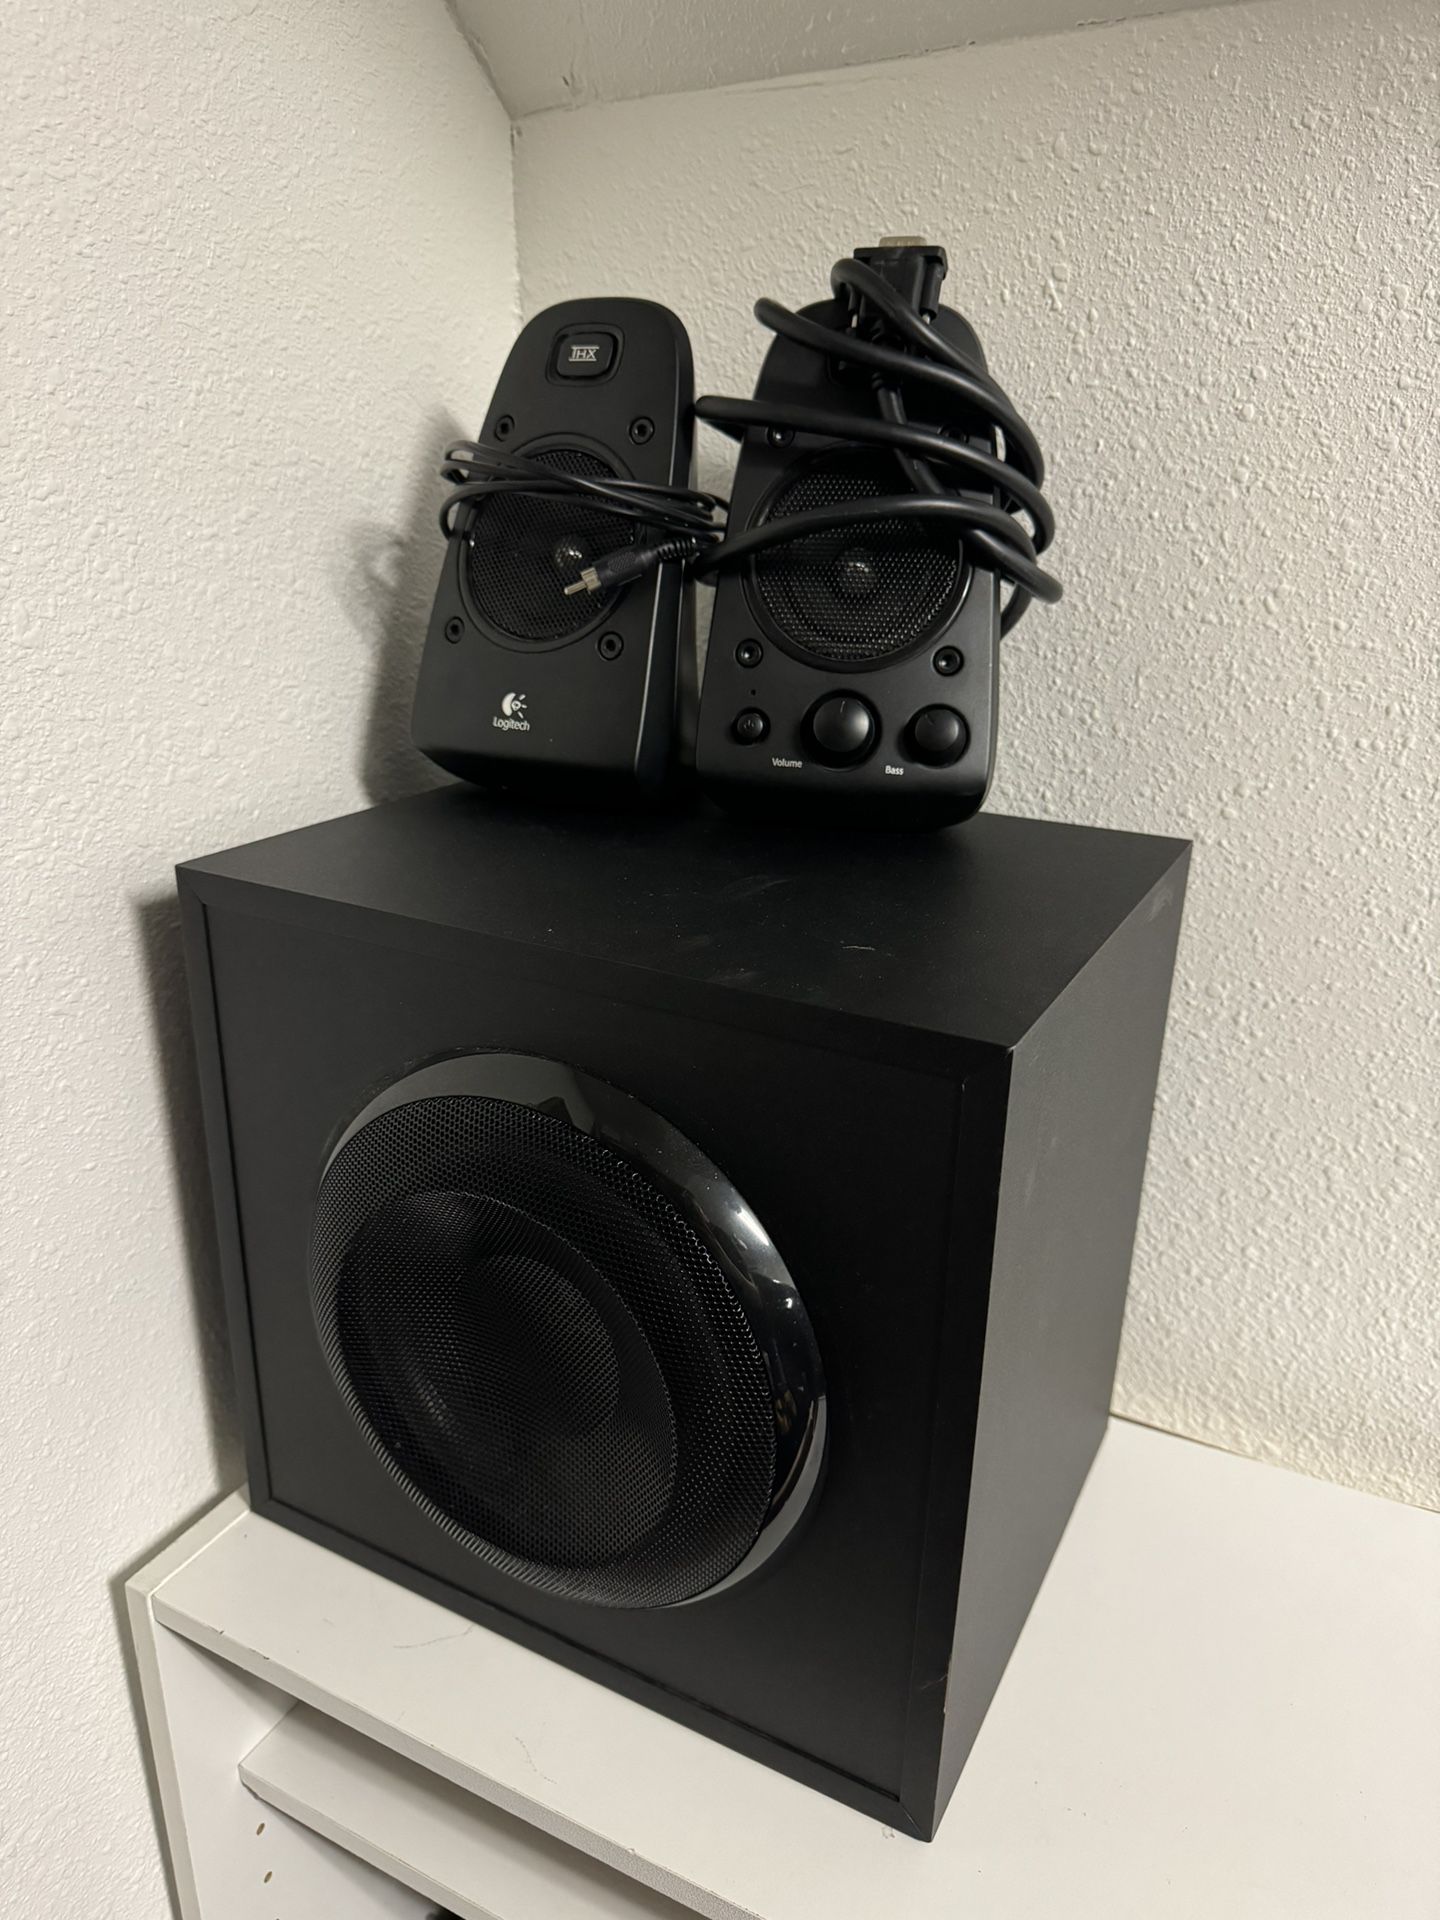 Stereo Speakers  With Subwoofer - Great condition!